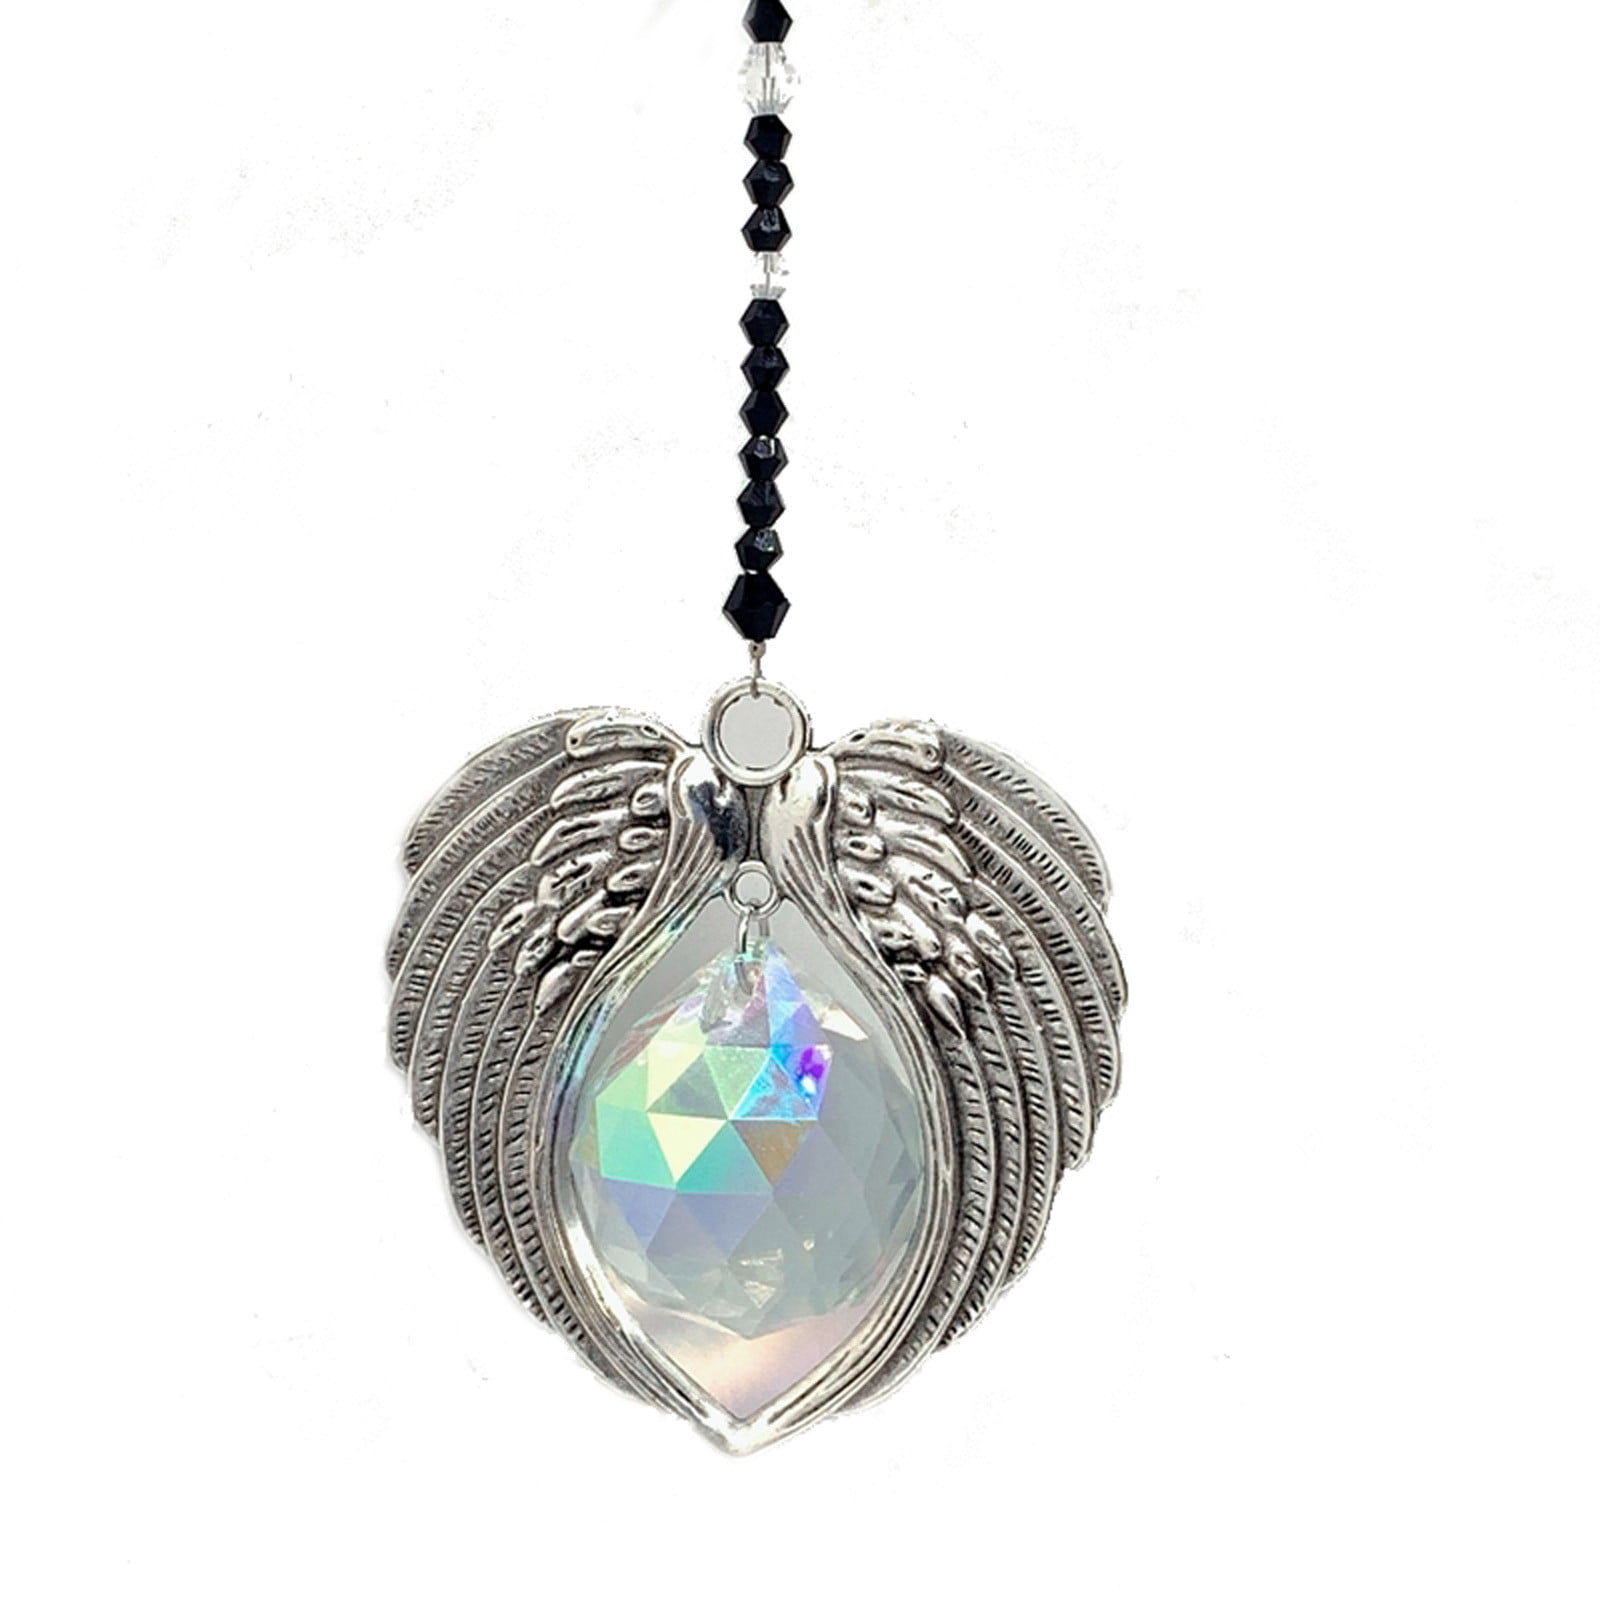 COOL FEATHER ANGEL WING SILVER PEWTER PENDANT NECKLACE